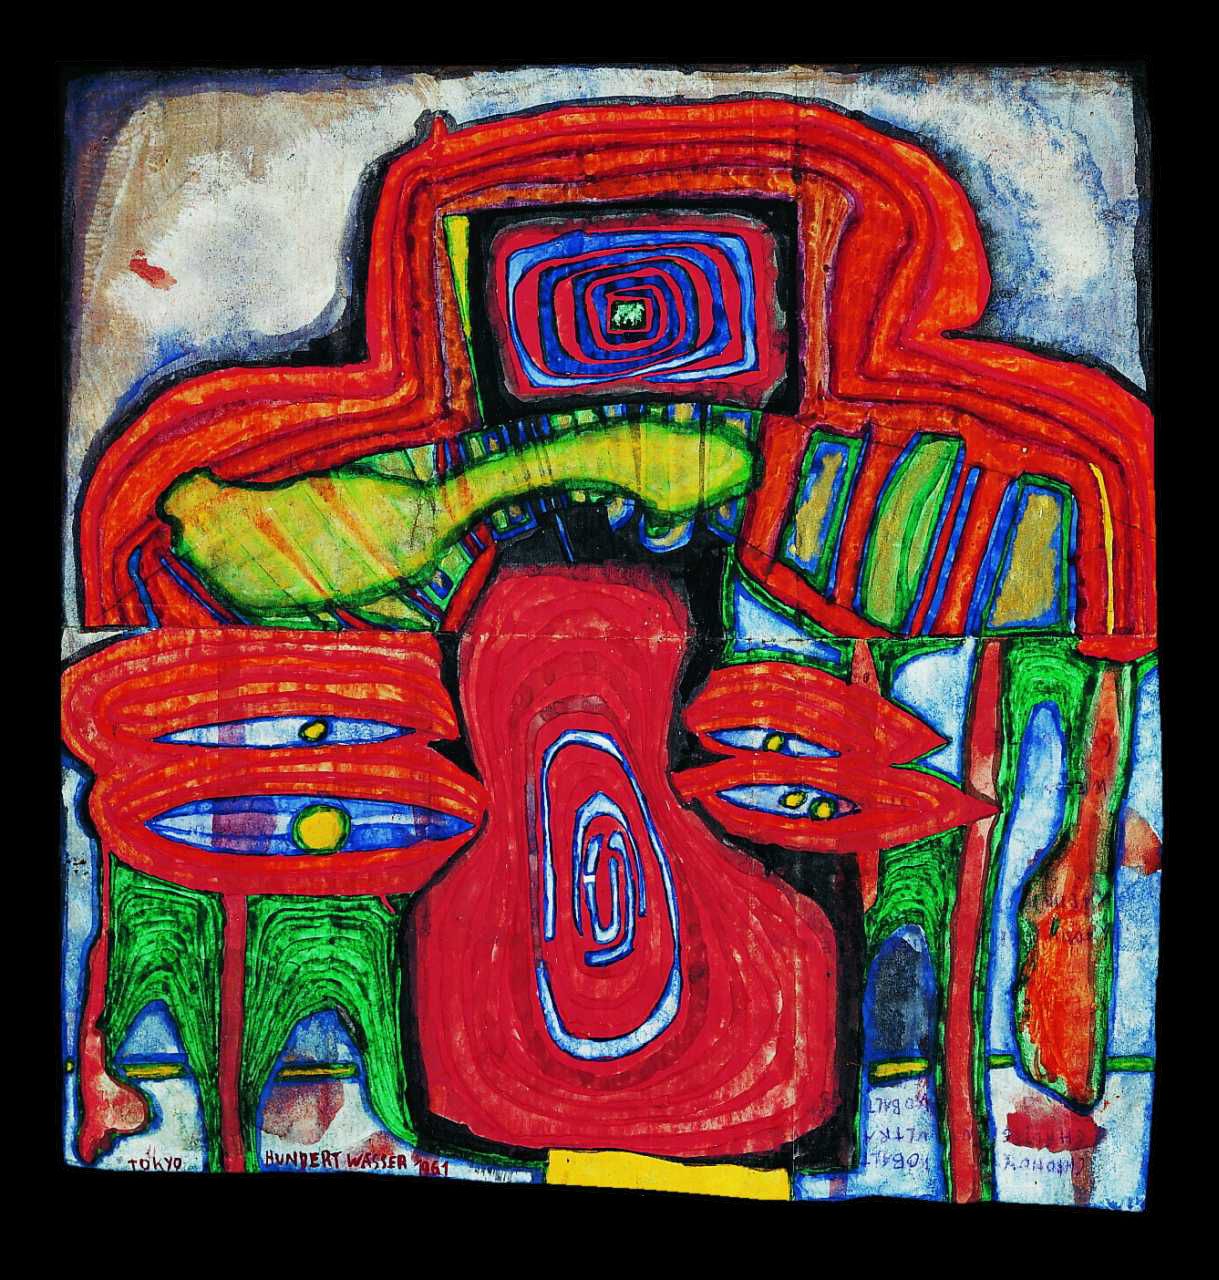 Hundertwasser - THE VERY END OF A WEEPING KING